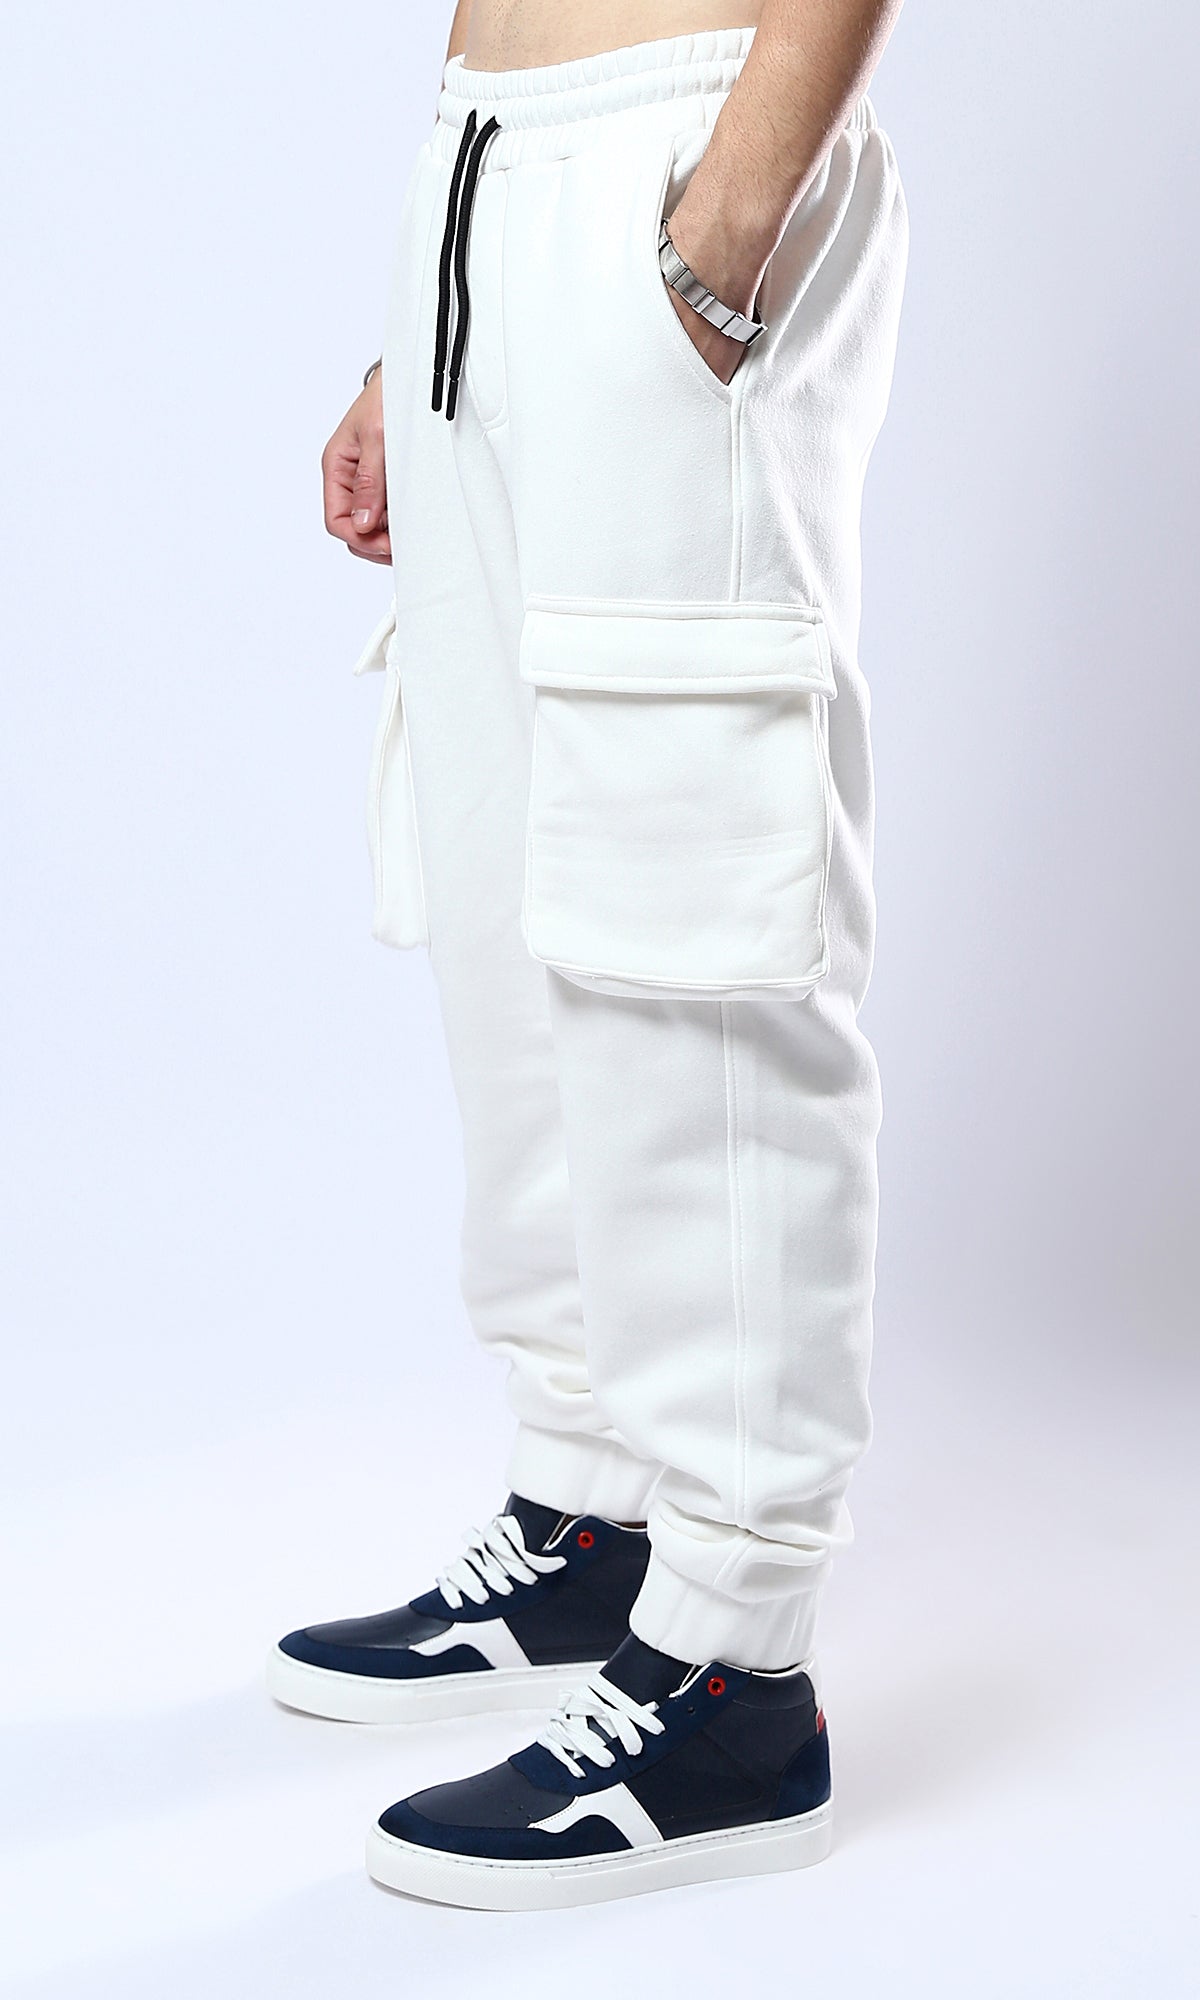 O178078 Slip On Off-White Jogger Pants With Elastic Waist